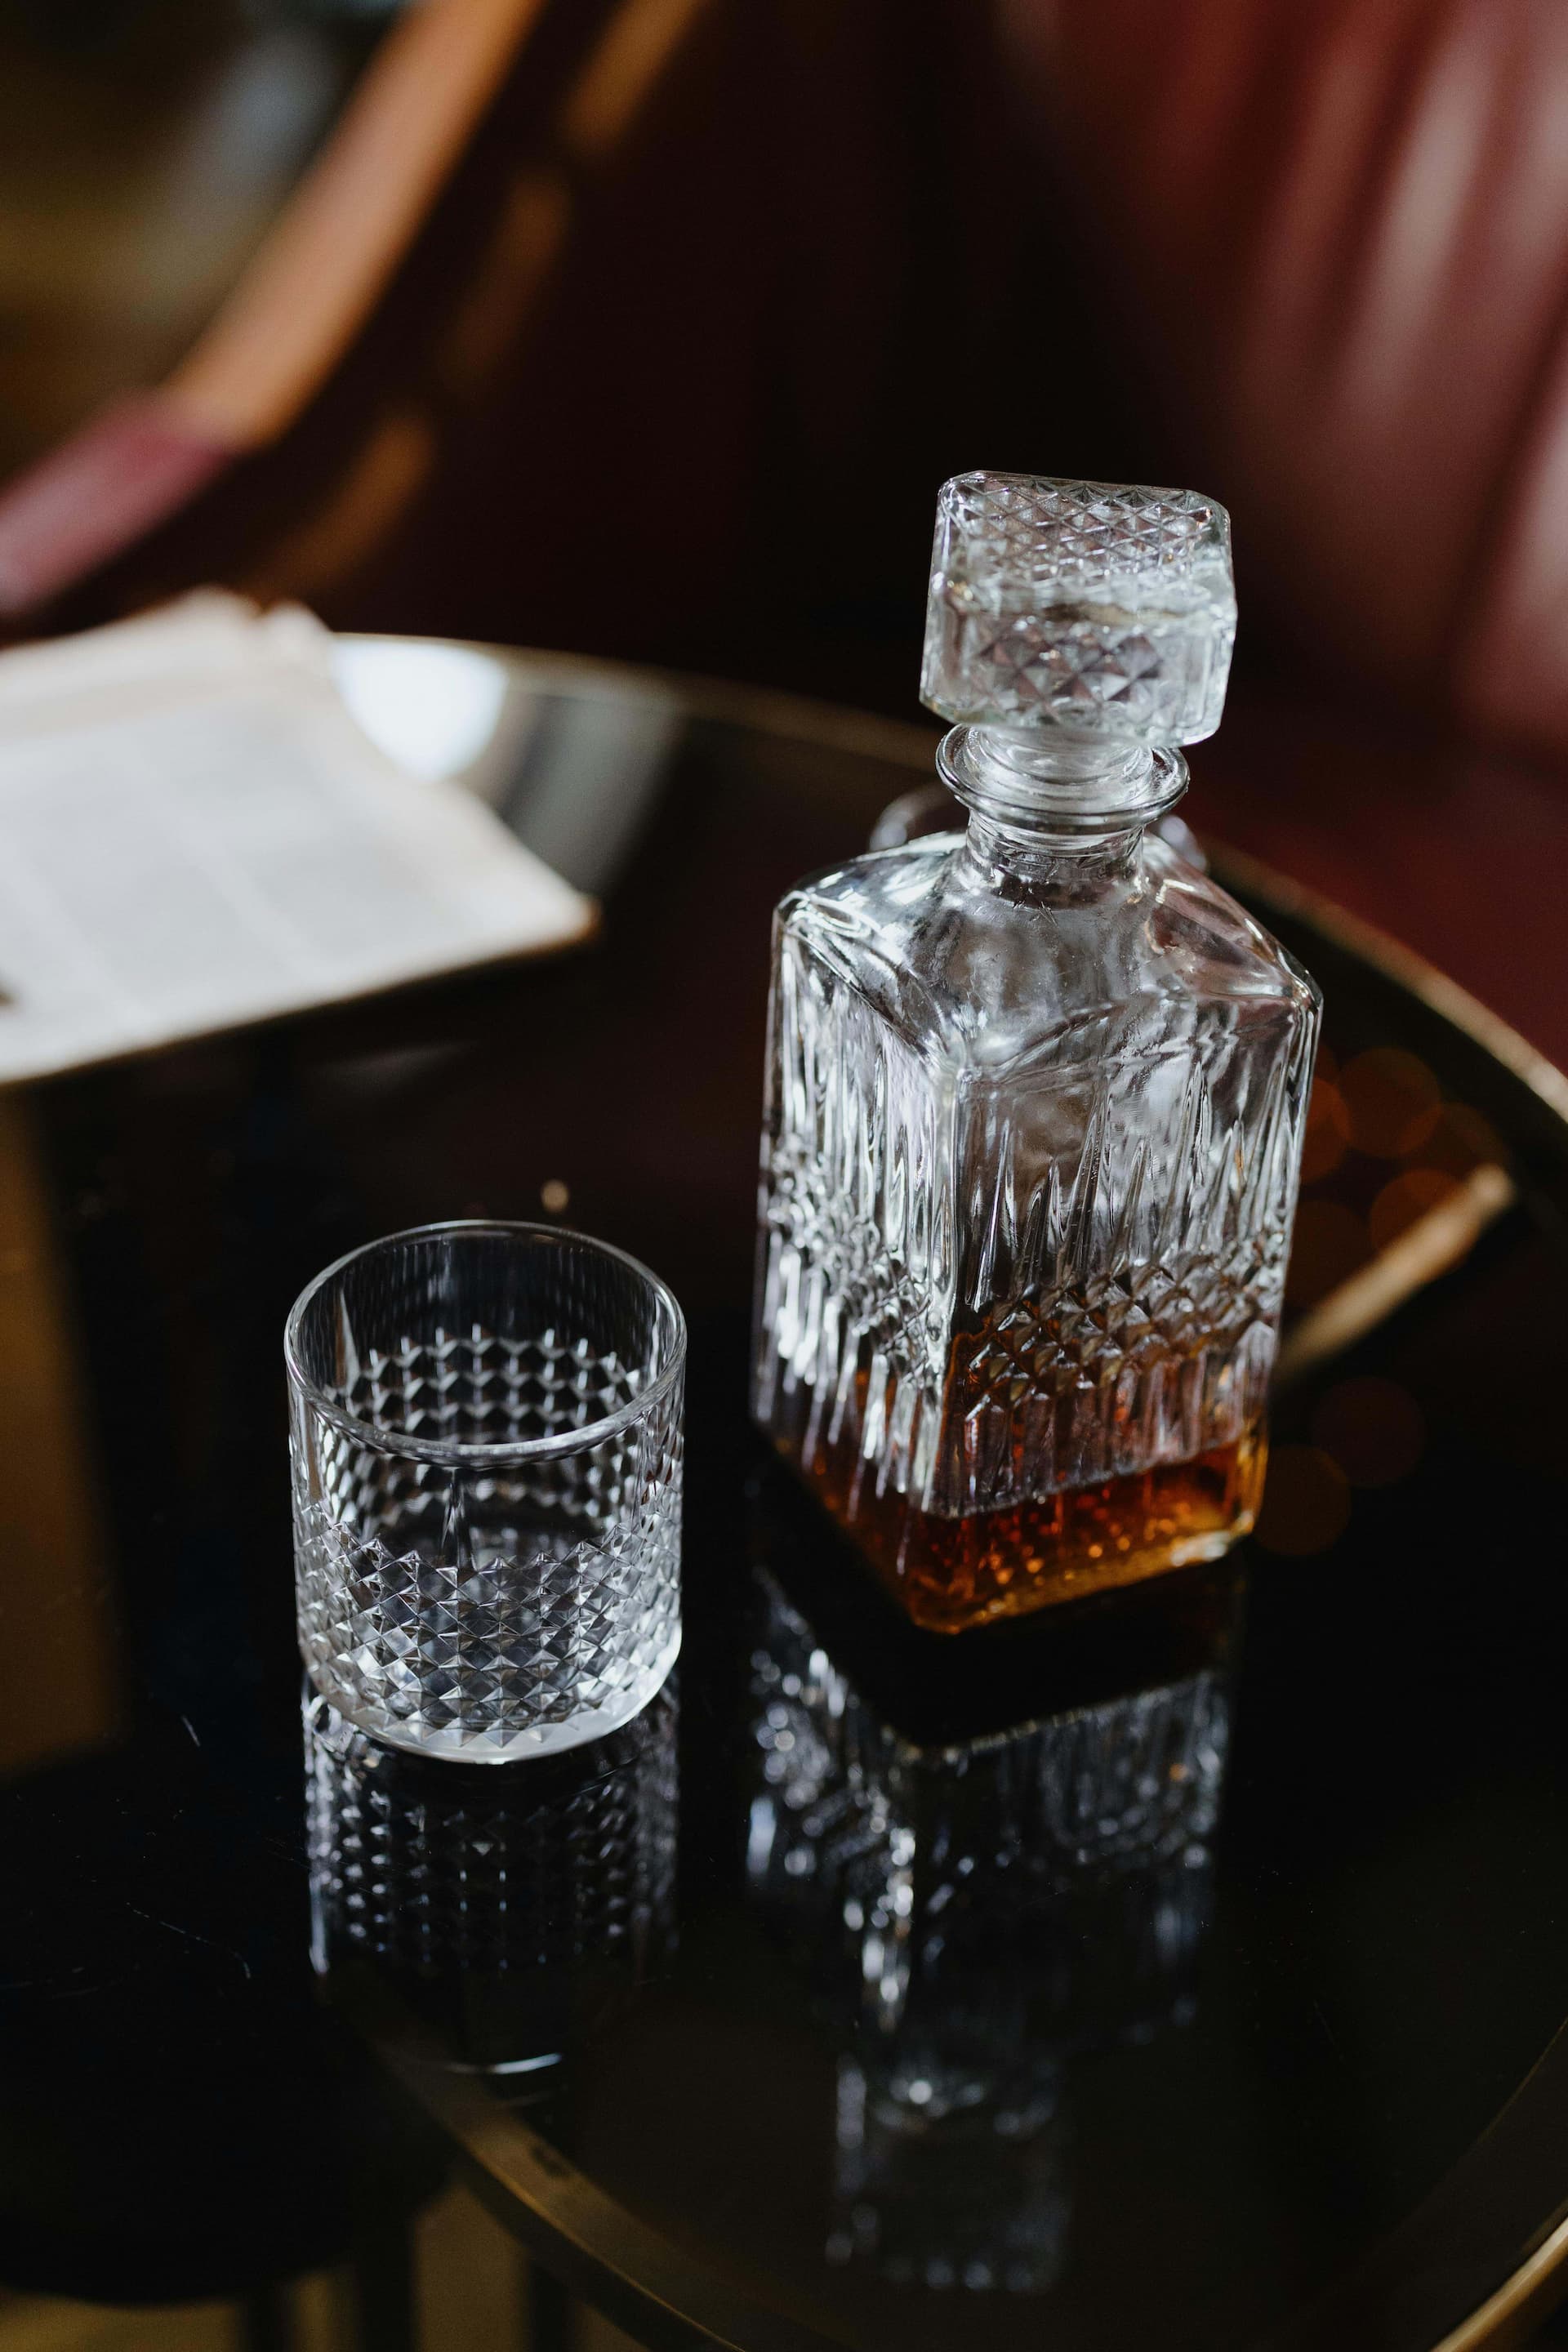 Storing whisky in a decanter